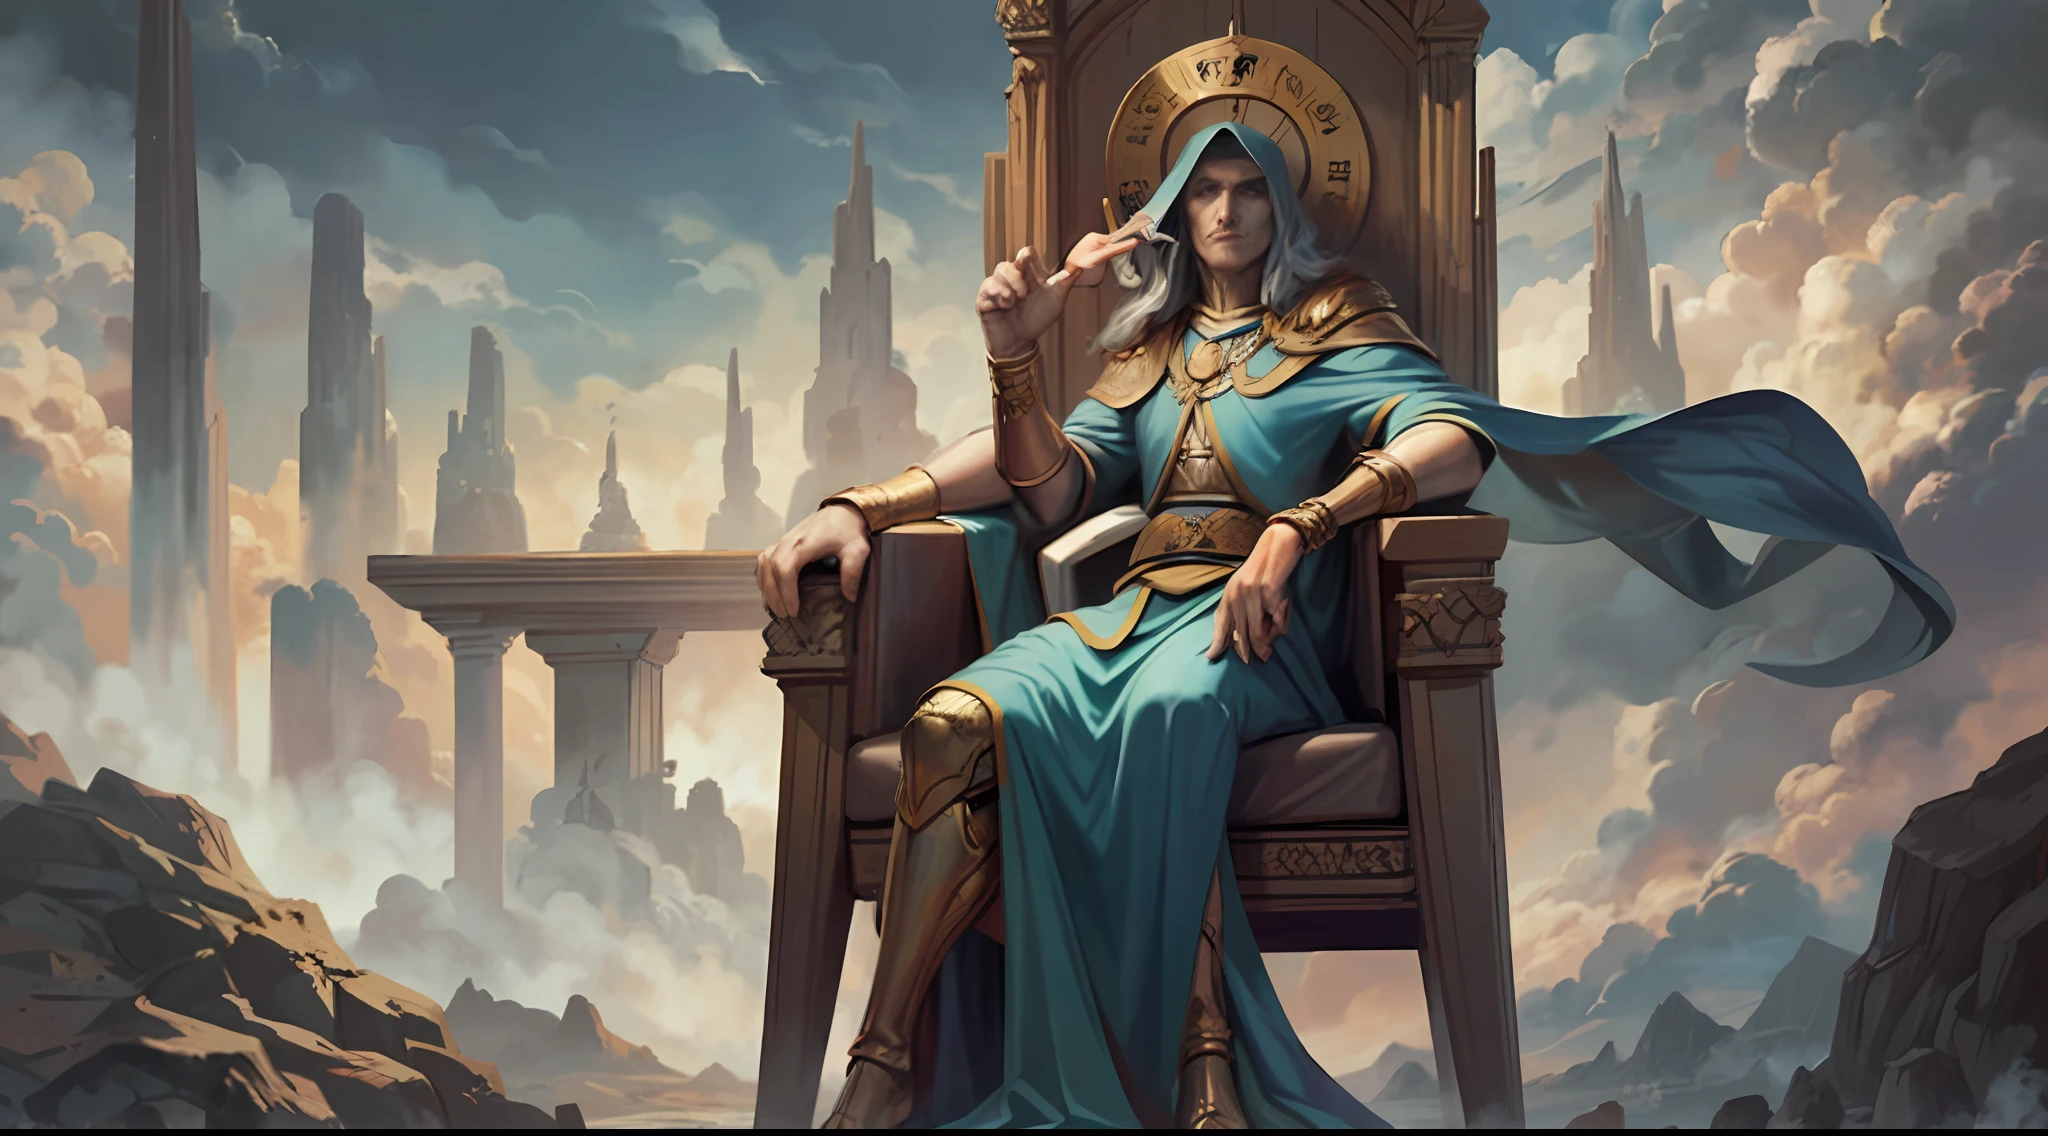 image of a man sitting on a throne with a crown, portrait of medieval old king, medieval old king, the god emperor of mankind, portrait of a medieval old king, lying a throne in a fantasy land, portrait of emperor of mankind, sitting on his throne, sitting on intricate throne, sat in his throne, god emperor --auto